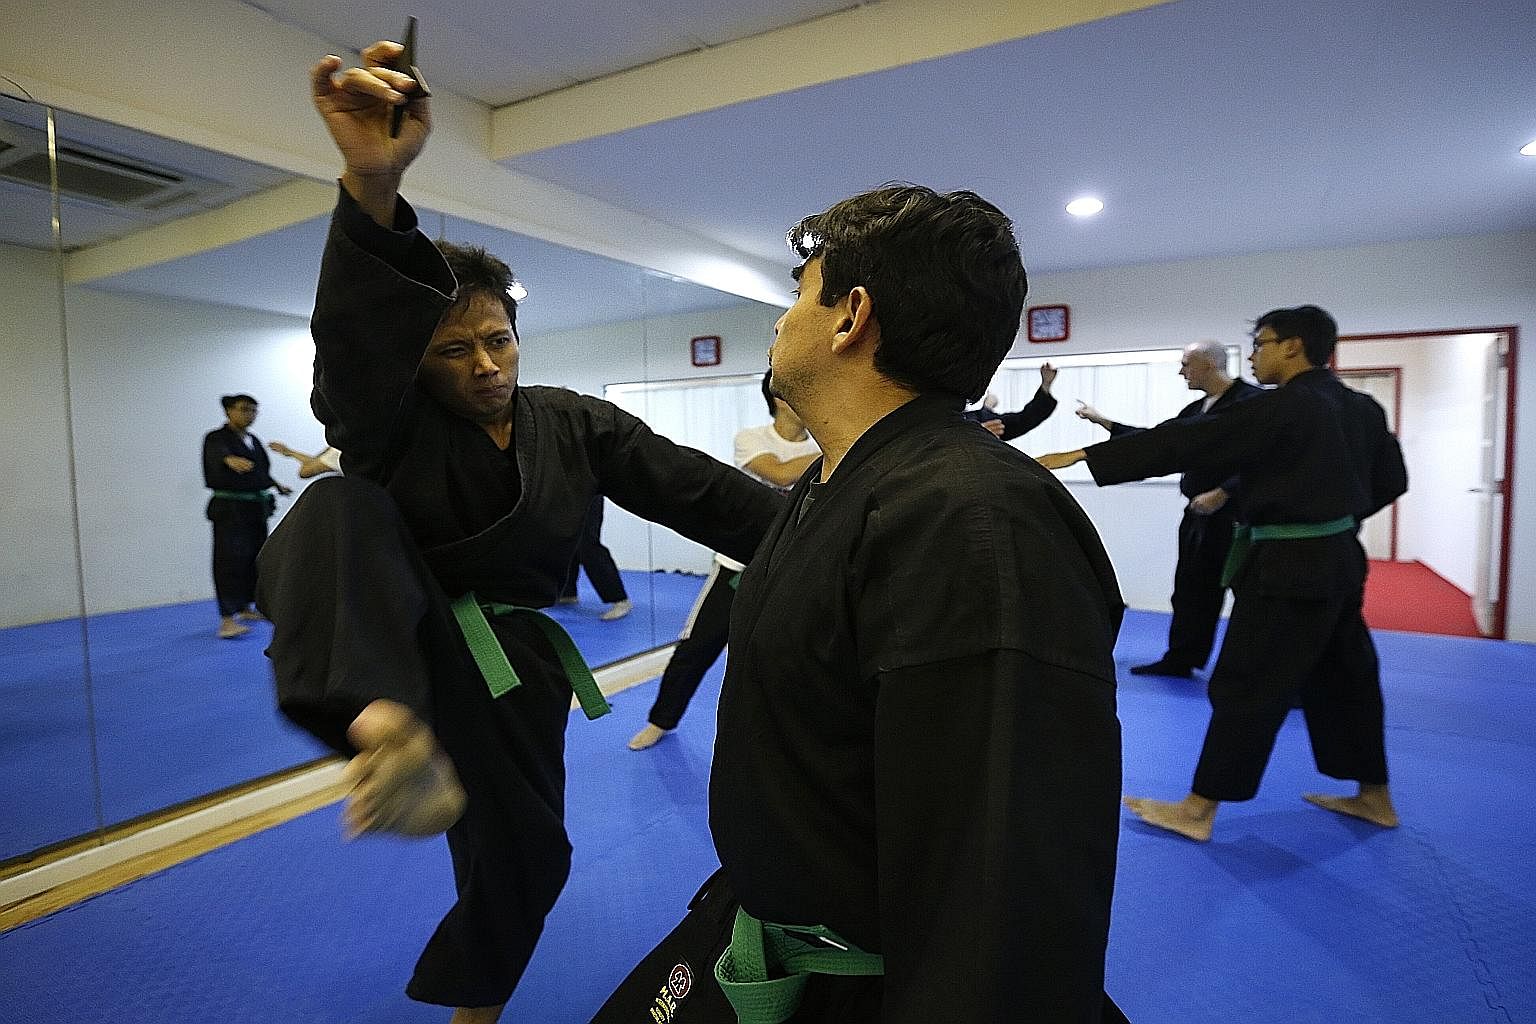 (Above) Ninjutsu student Lal Rin Lian uses a shuriken to distract his opponent - a common tactic that seeks to buy a practitioner sufficient time to take out his attacker - as he delivers a surprise kick during training. Besides striking, grappling, 